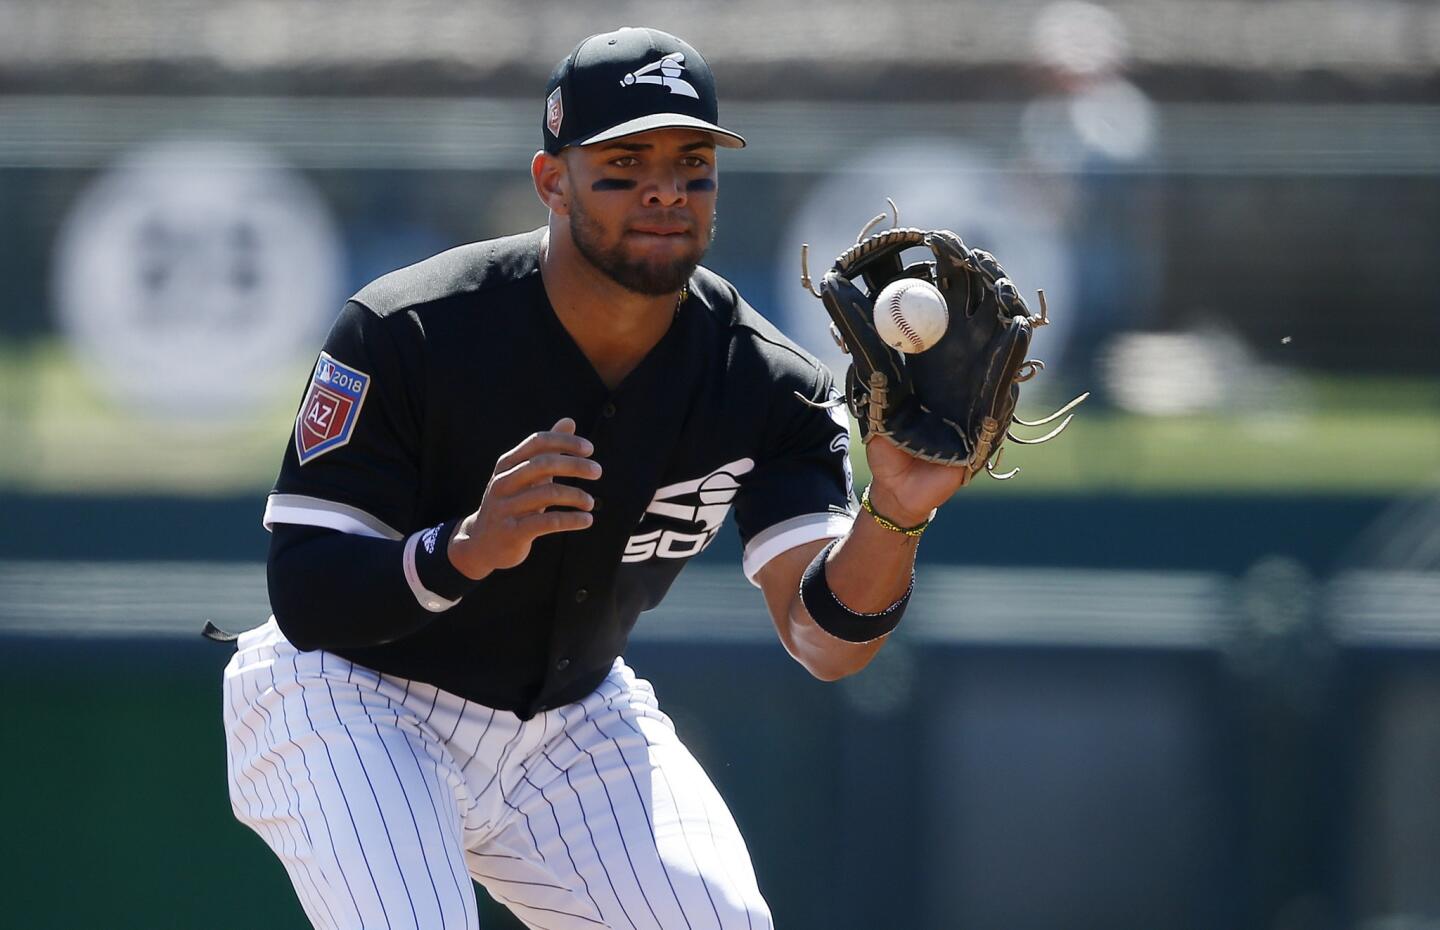 White Sox second baseman Yoan Moncada makes a catch during the first inning of a spring training game against the Mariners on March 23, 2018, in Glendale, Ariz.